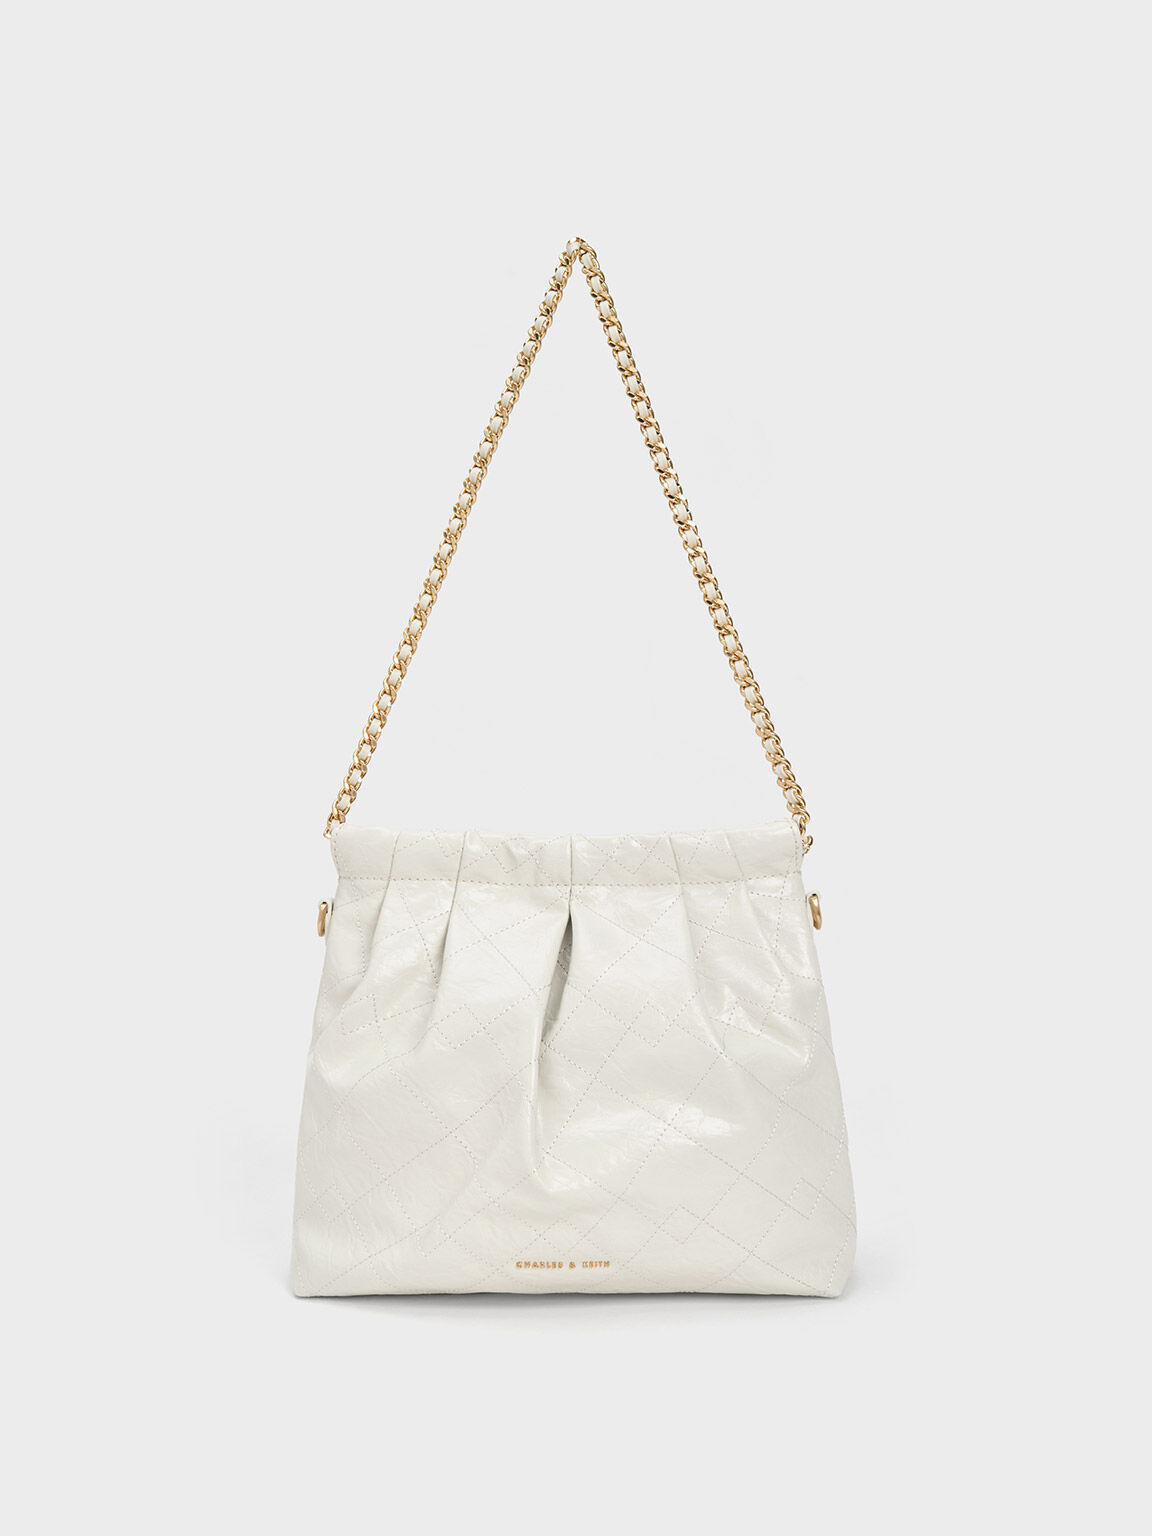 Charles & Keith - Women's Chain Handle Shoulder Bag, White, M